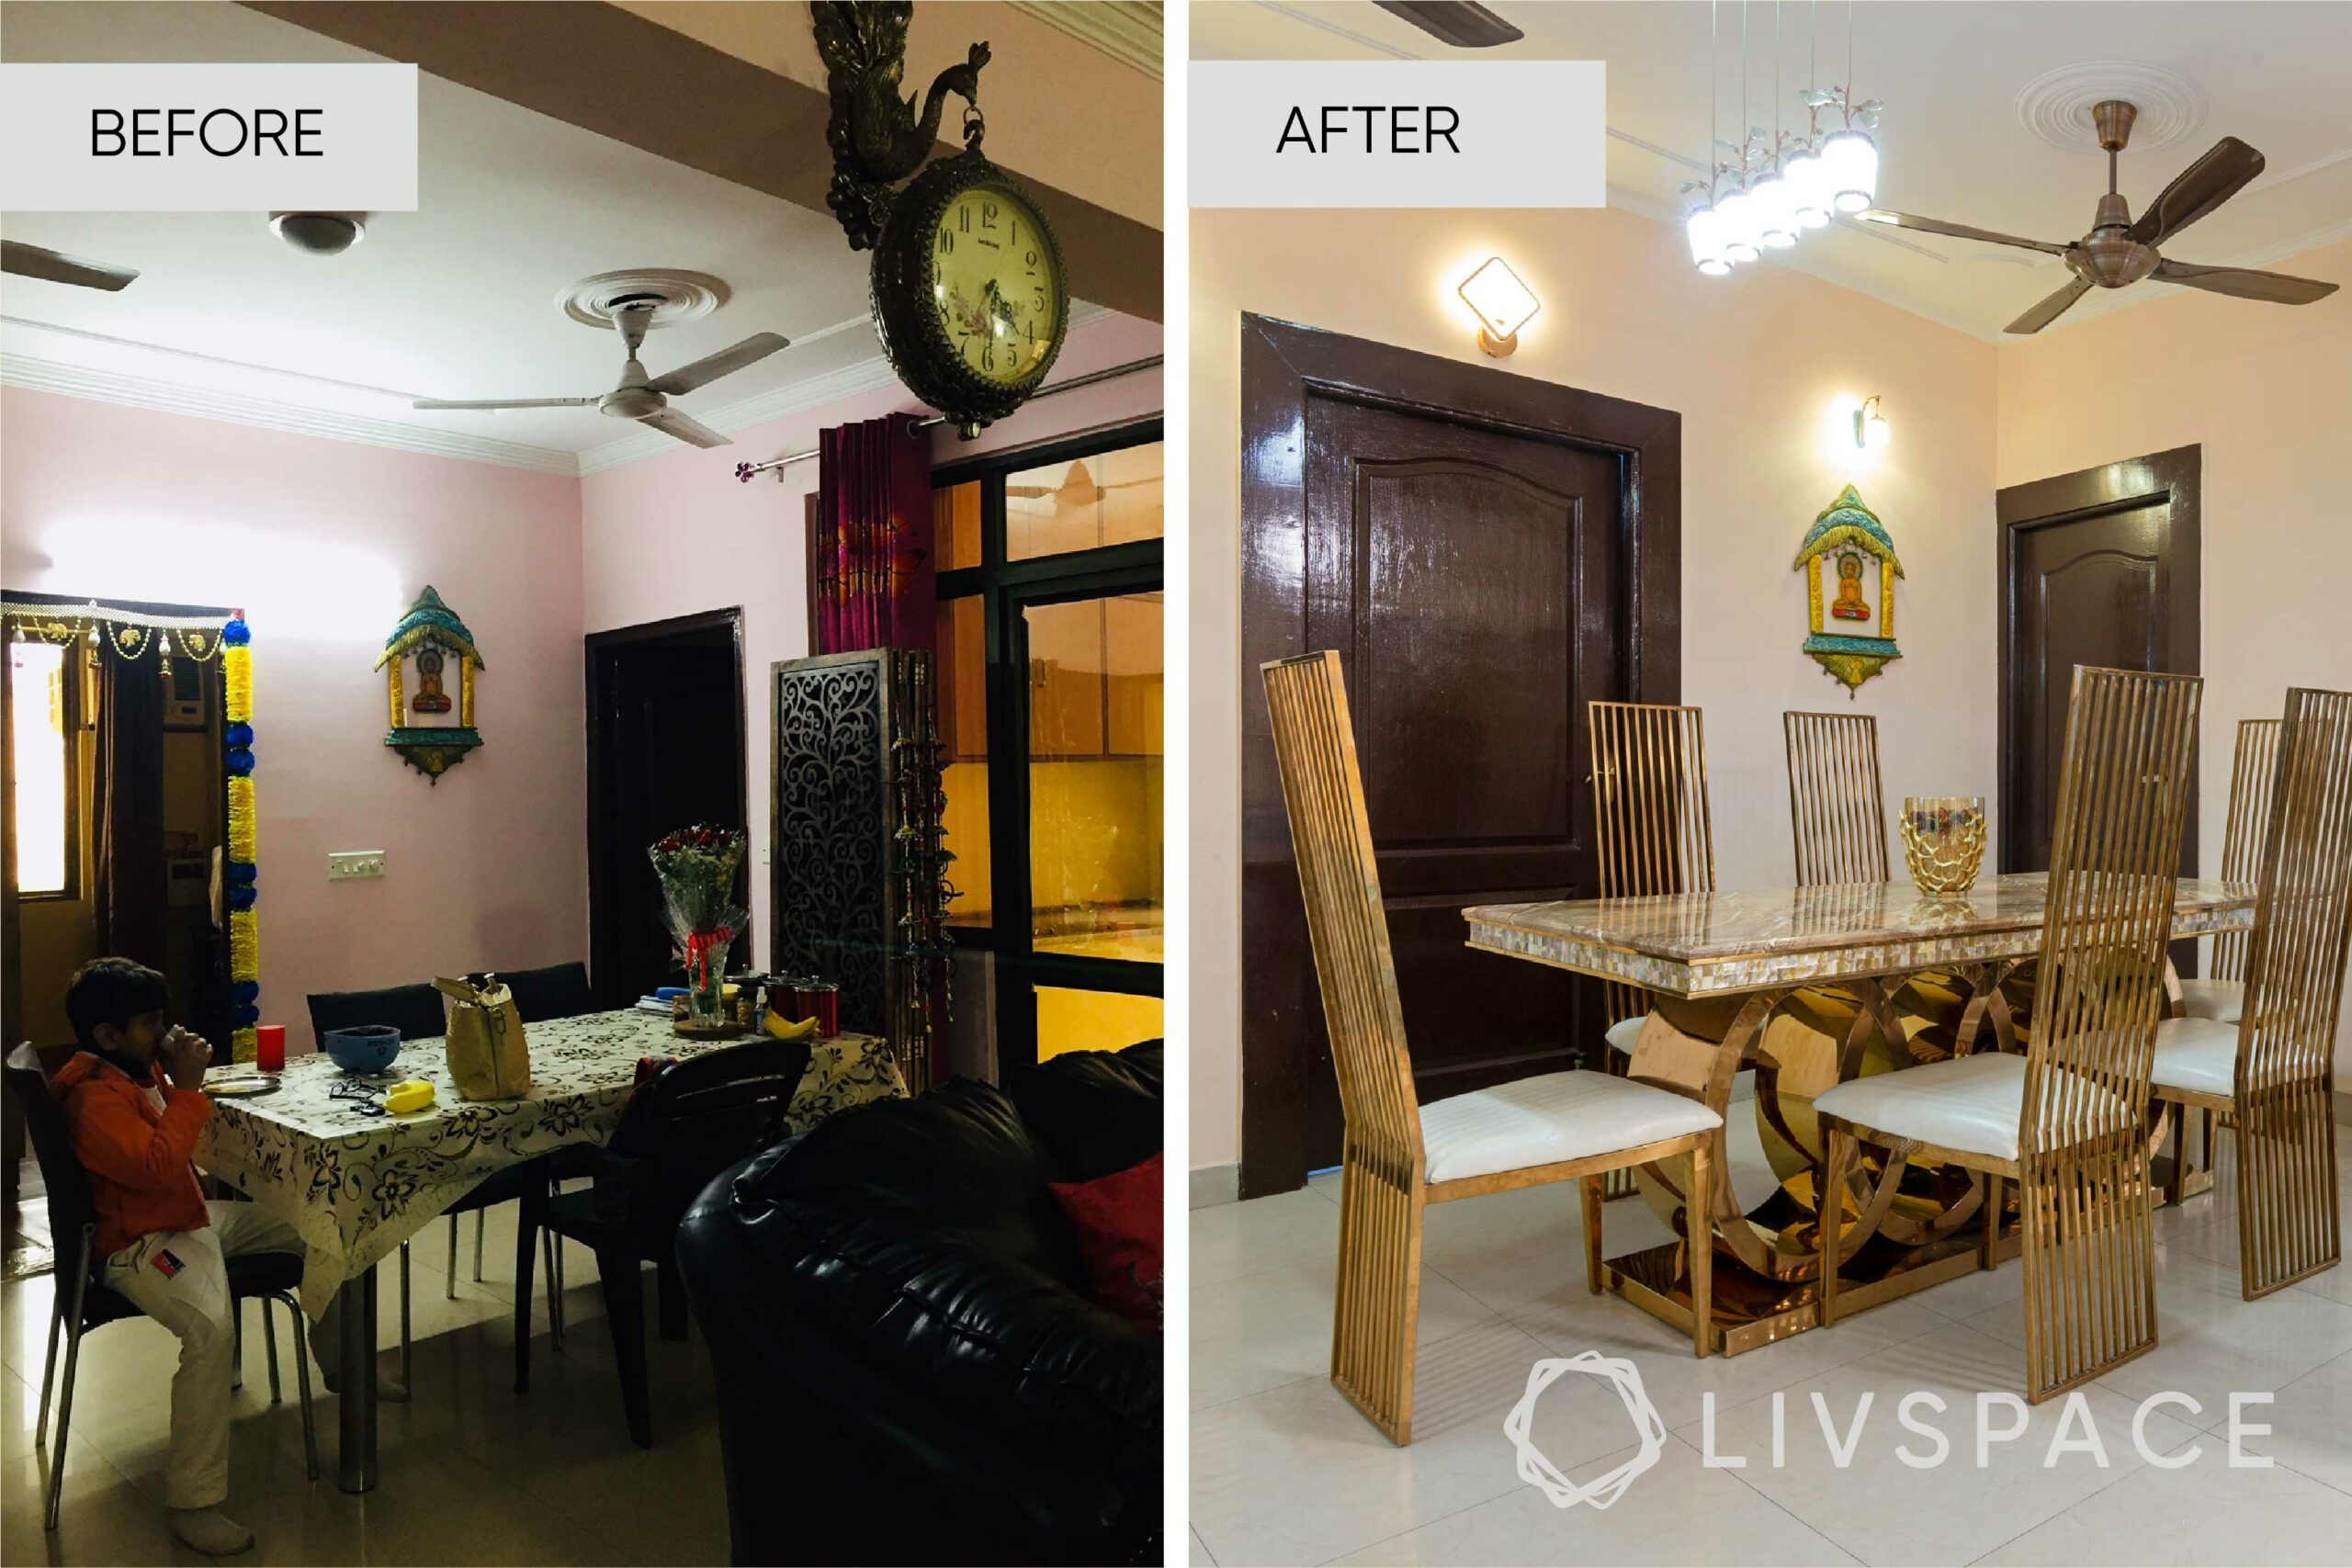 4-bhk-house-design-before-after-dining-room